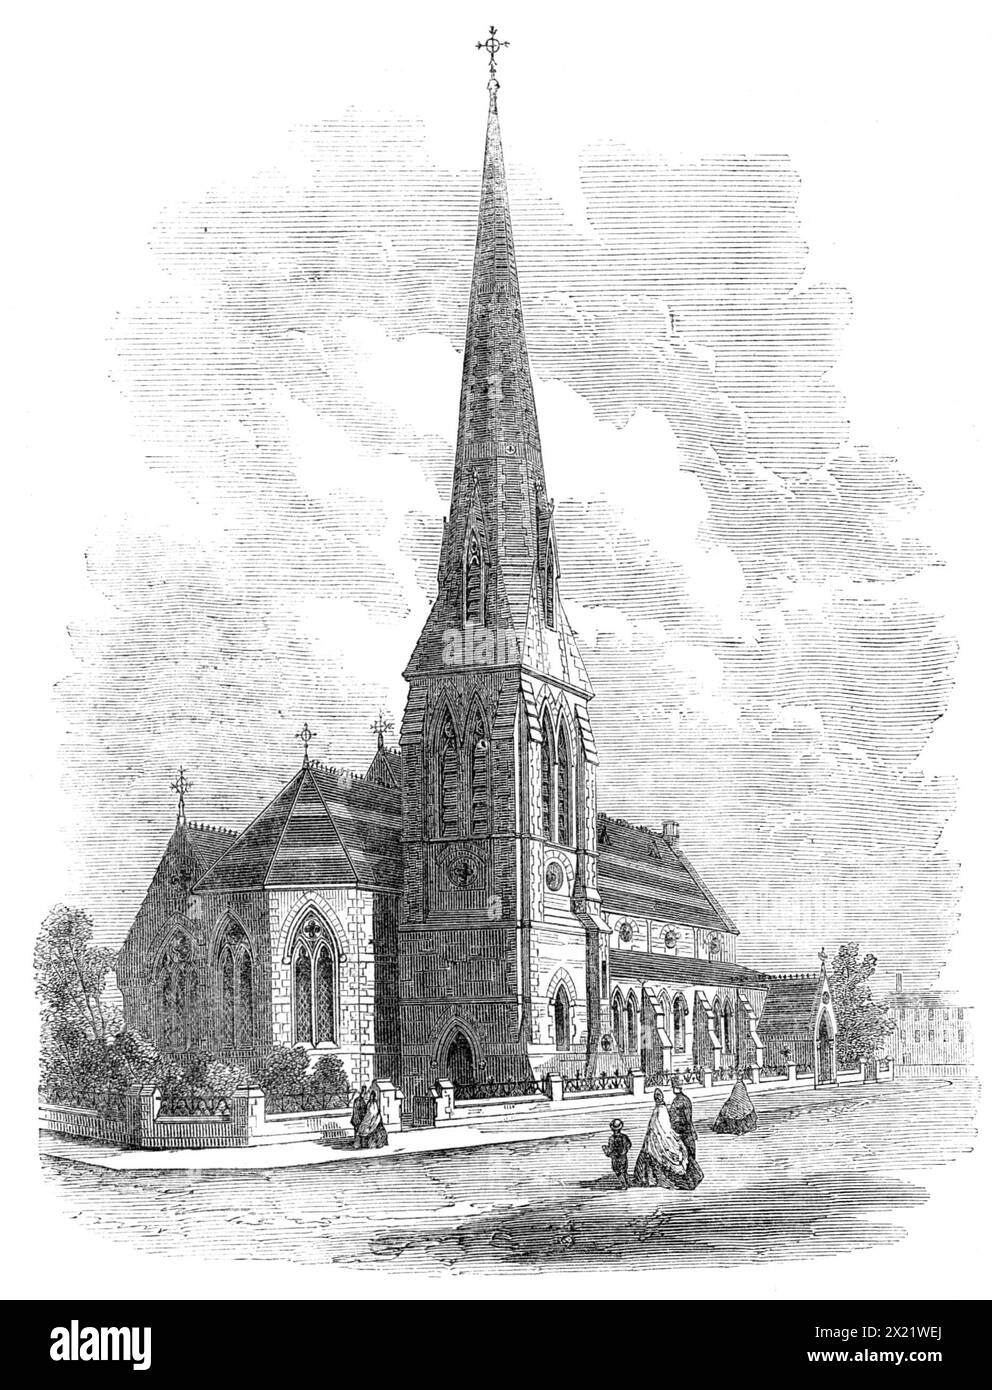 The new church of St. Stephen, Carlisle, built by Miss Burdett Coutts, 1865. 'The exterior presents an agreeable contrast of colour, by the judicious use of red and white stone. The general style of architecture is geometric Gothic...The most striking feature is the square tower at the James-street end...On the north side of the church, in Hewson-street, we find the main entrance to the church, and this is the side on which the building is seen to the best advantage. The entrance is by a porch, with a pitched roof, the doorway being a Gothic arch, with a dog-tooth moulding supported upon pilla Stock Photo